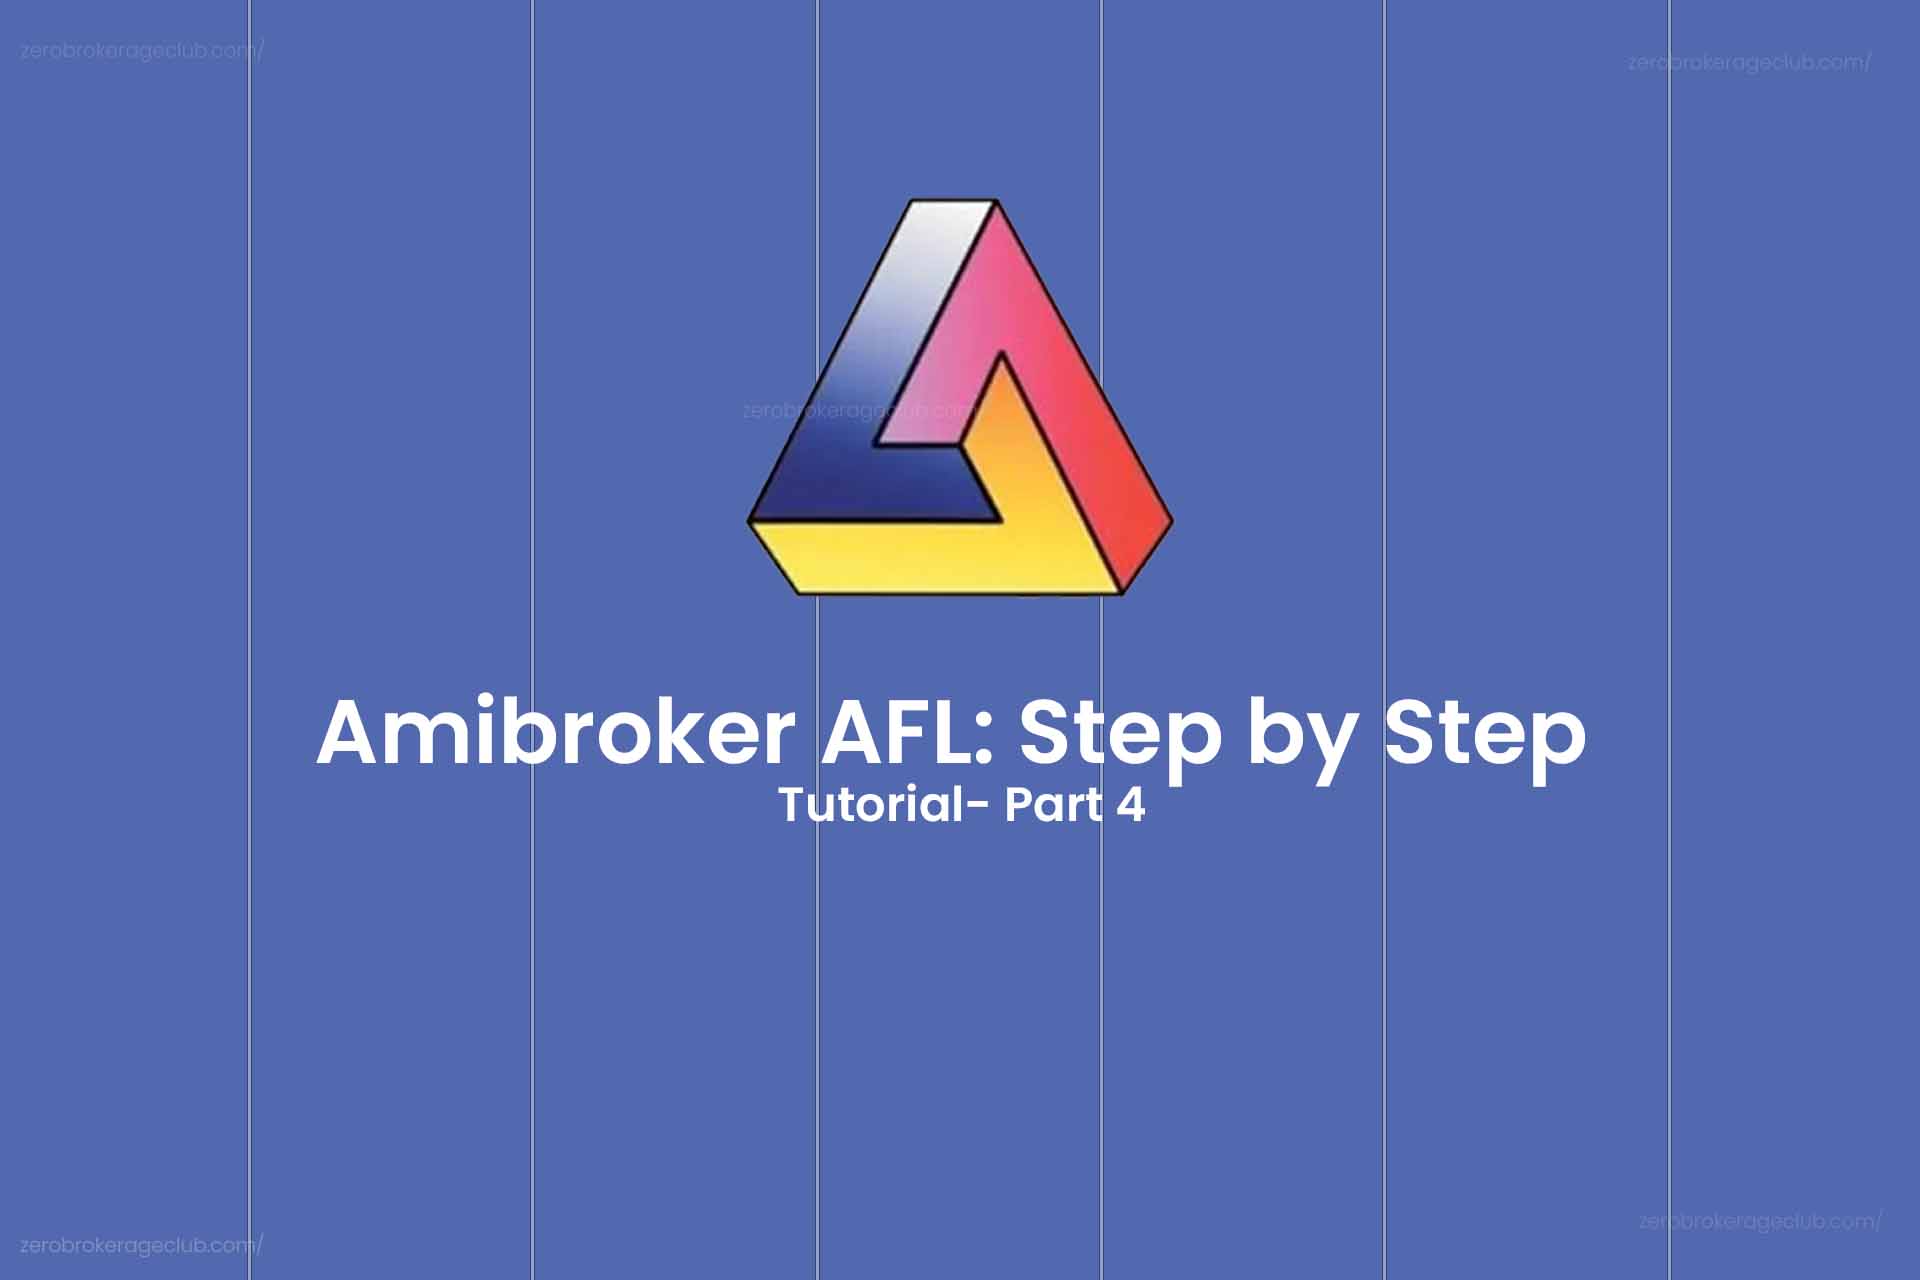 Amibroker AFL: Step by Step Tutorial- Part 4